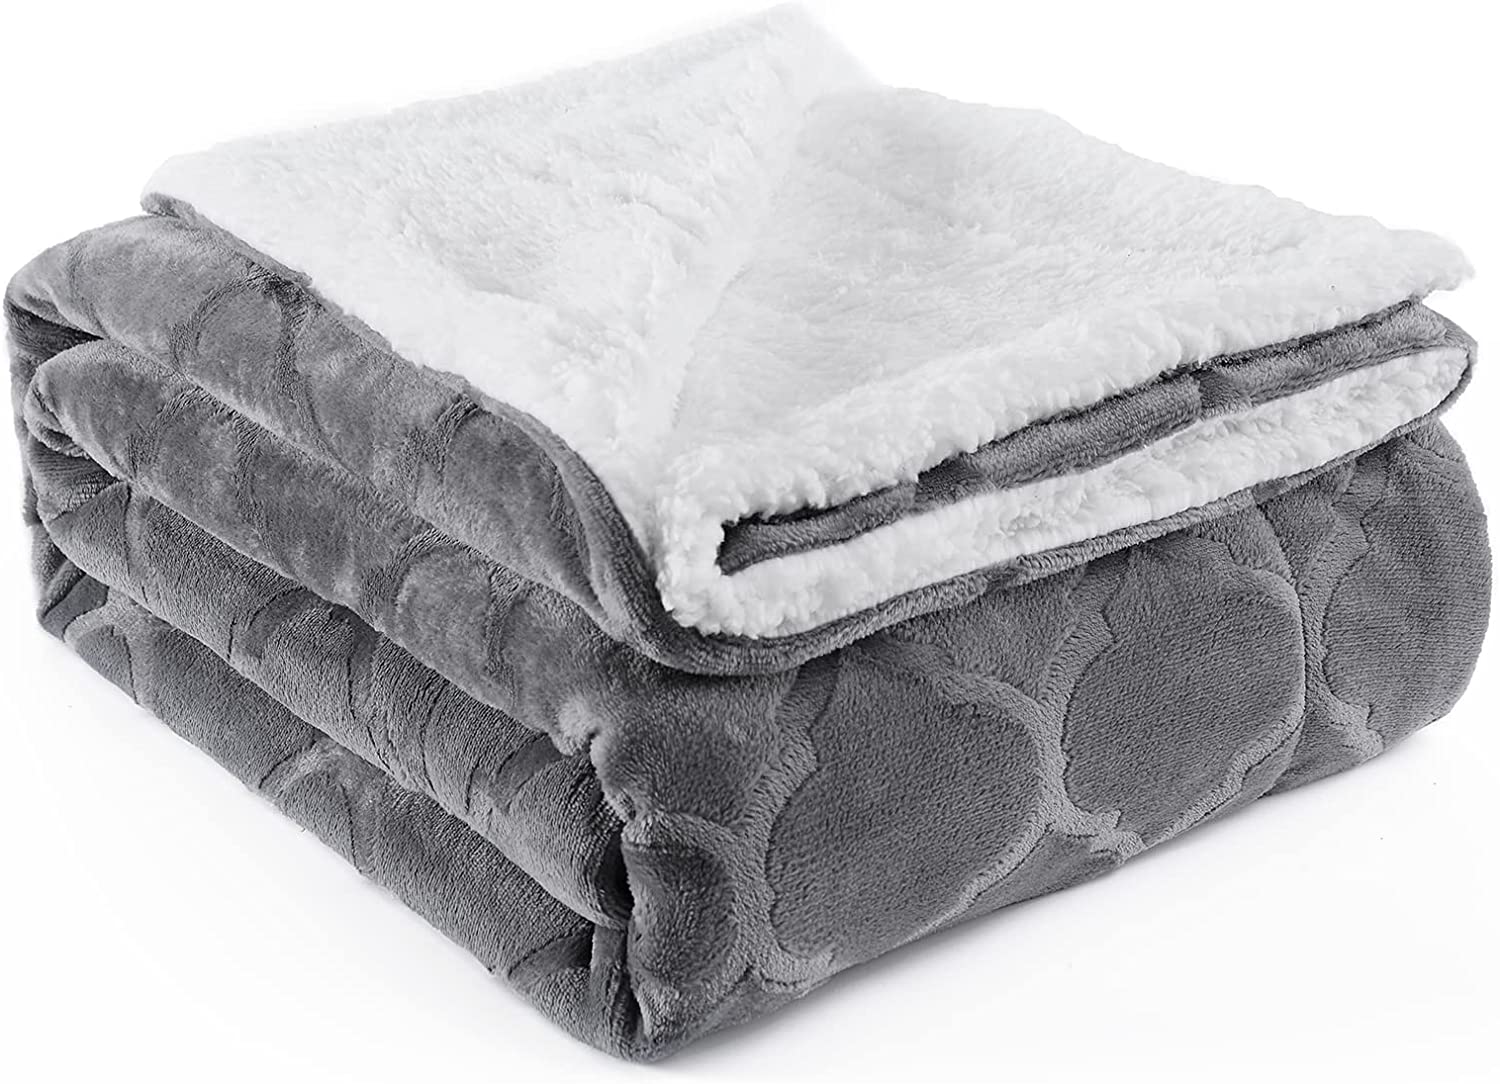 Sherpa Throw Blankets, Microfiber Soft Throw Blanket for Bed, Plush Warm Throw Blankets for Adults, Fleece Throw Blanket for Couch Featured Image